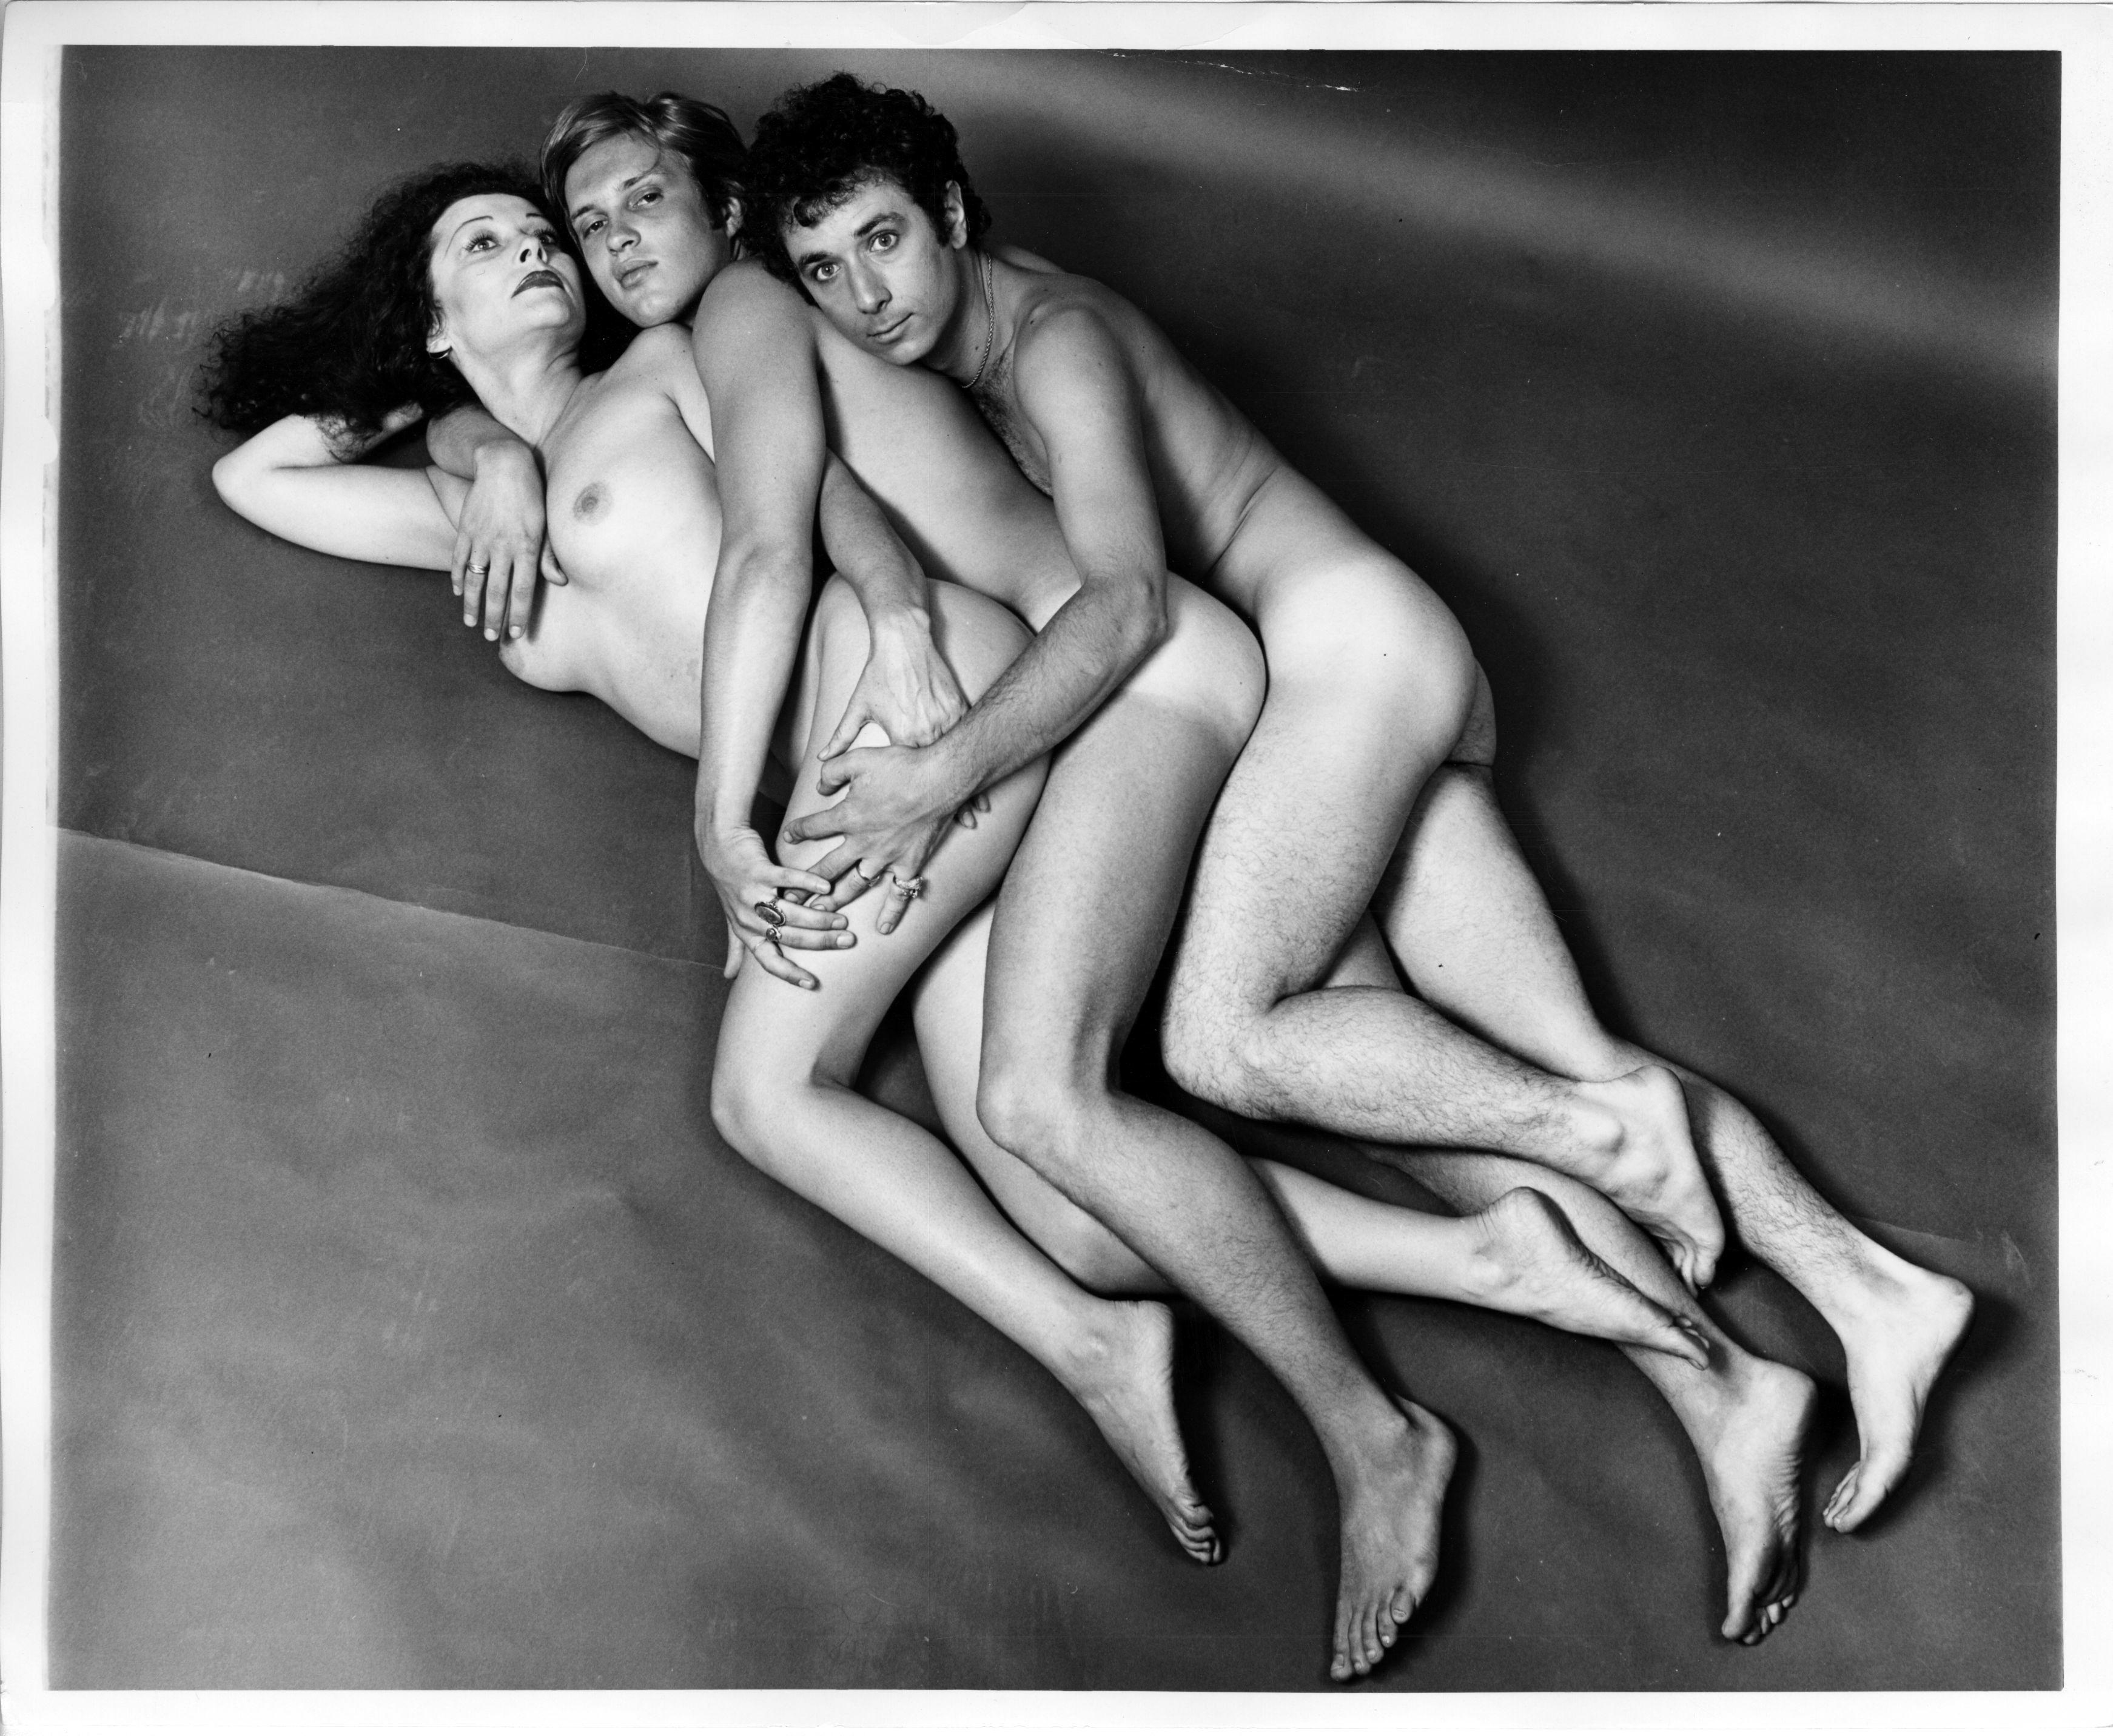 Jack Mitchell Nude Photograph - Artist & Warhol Superstar Ultra Violet nude with friends for After Dark Magazine